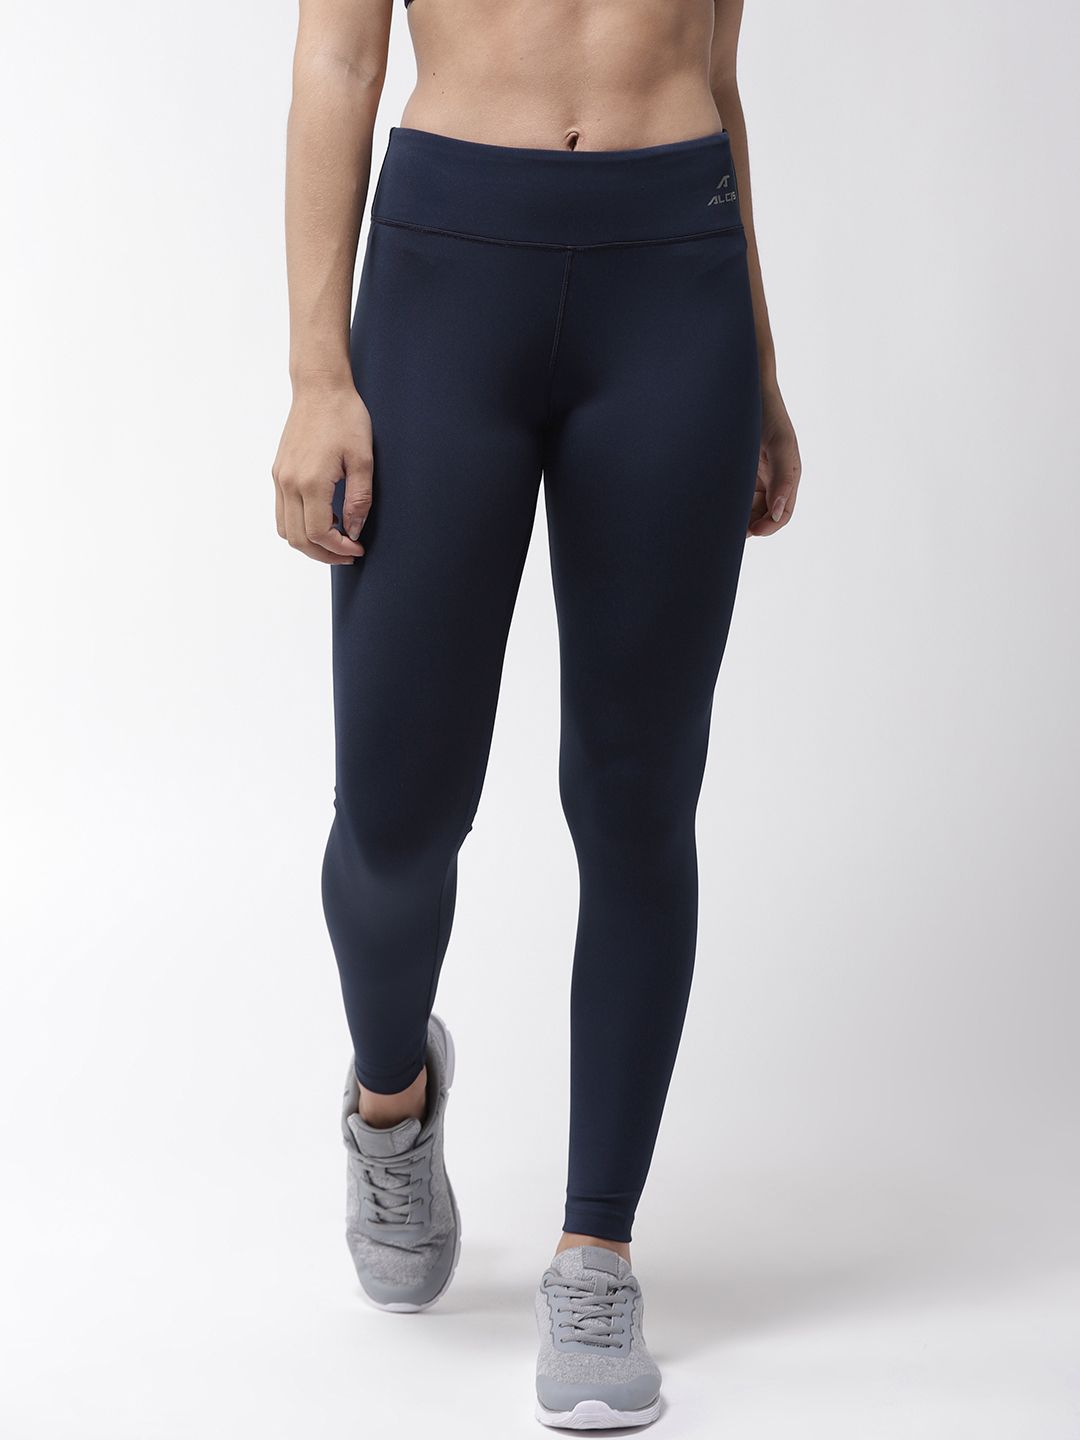 Alcis Women Navy Blue Solid Training Tights Price in India